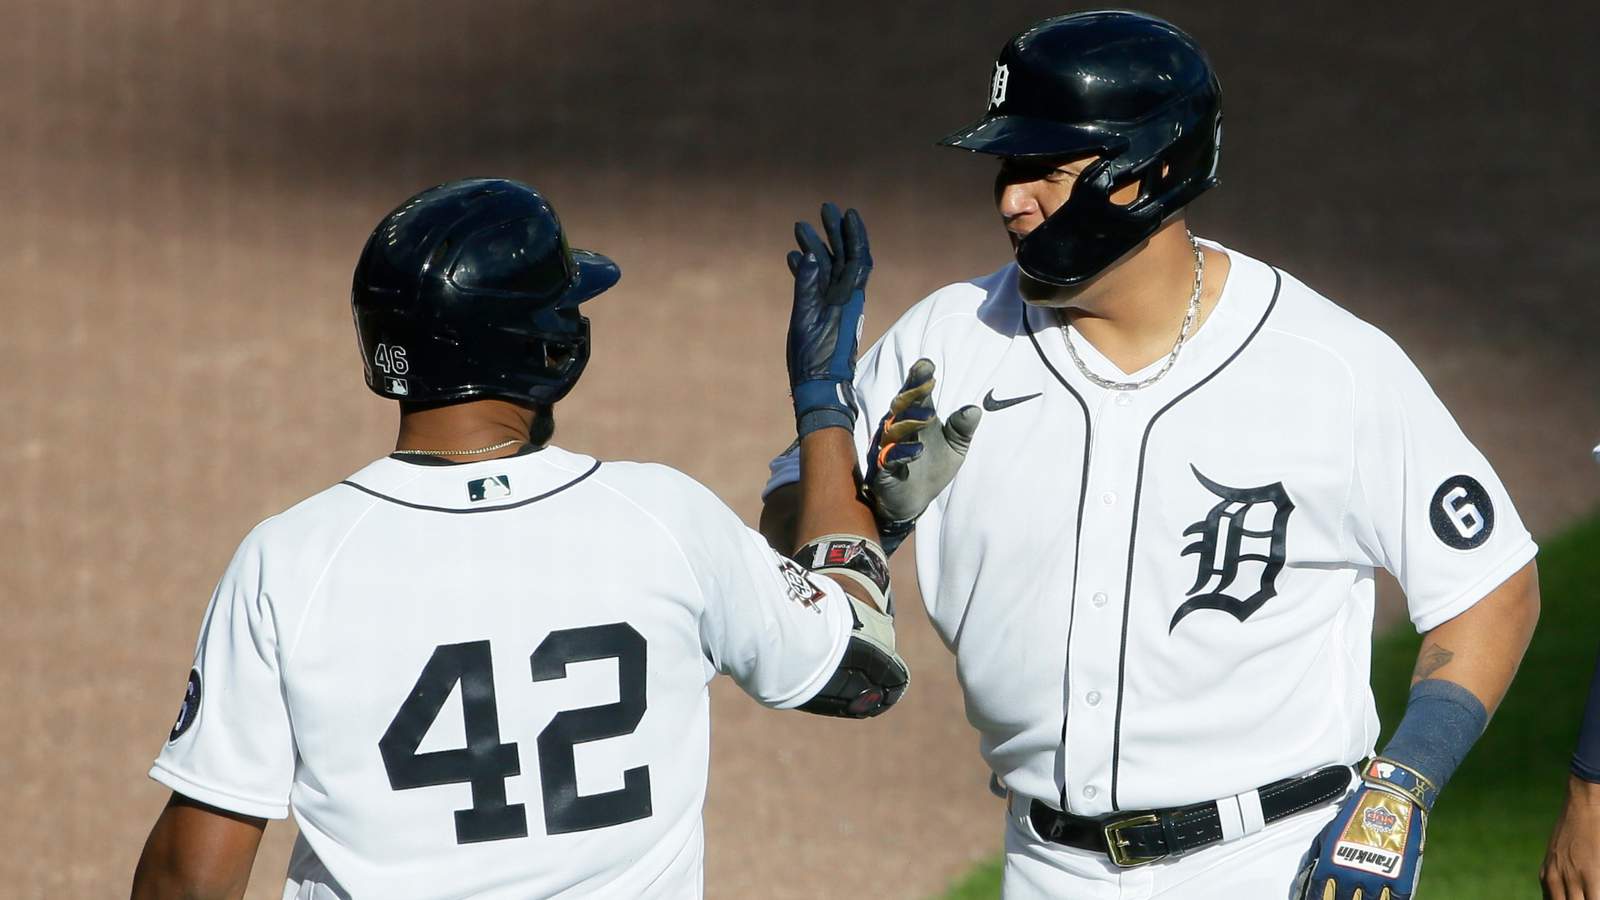 Are Detroit Tigers really good enough to win final AL wild card spot after trade deadline?